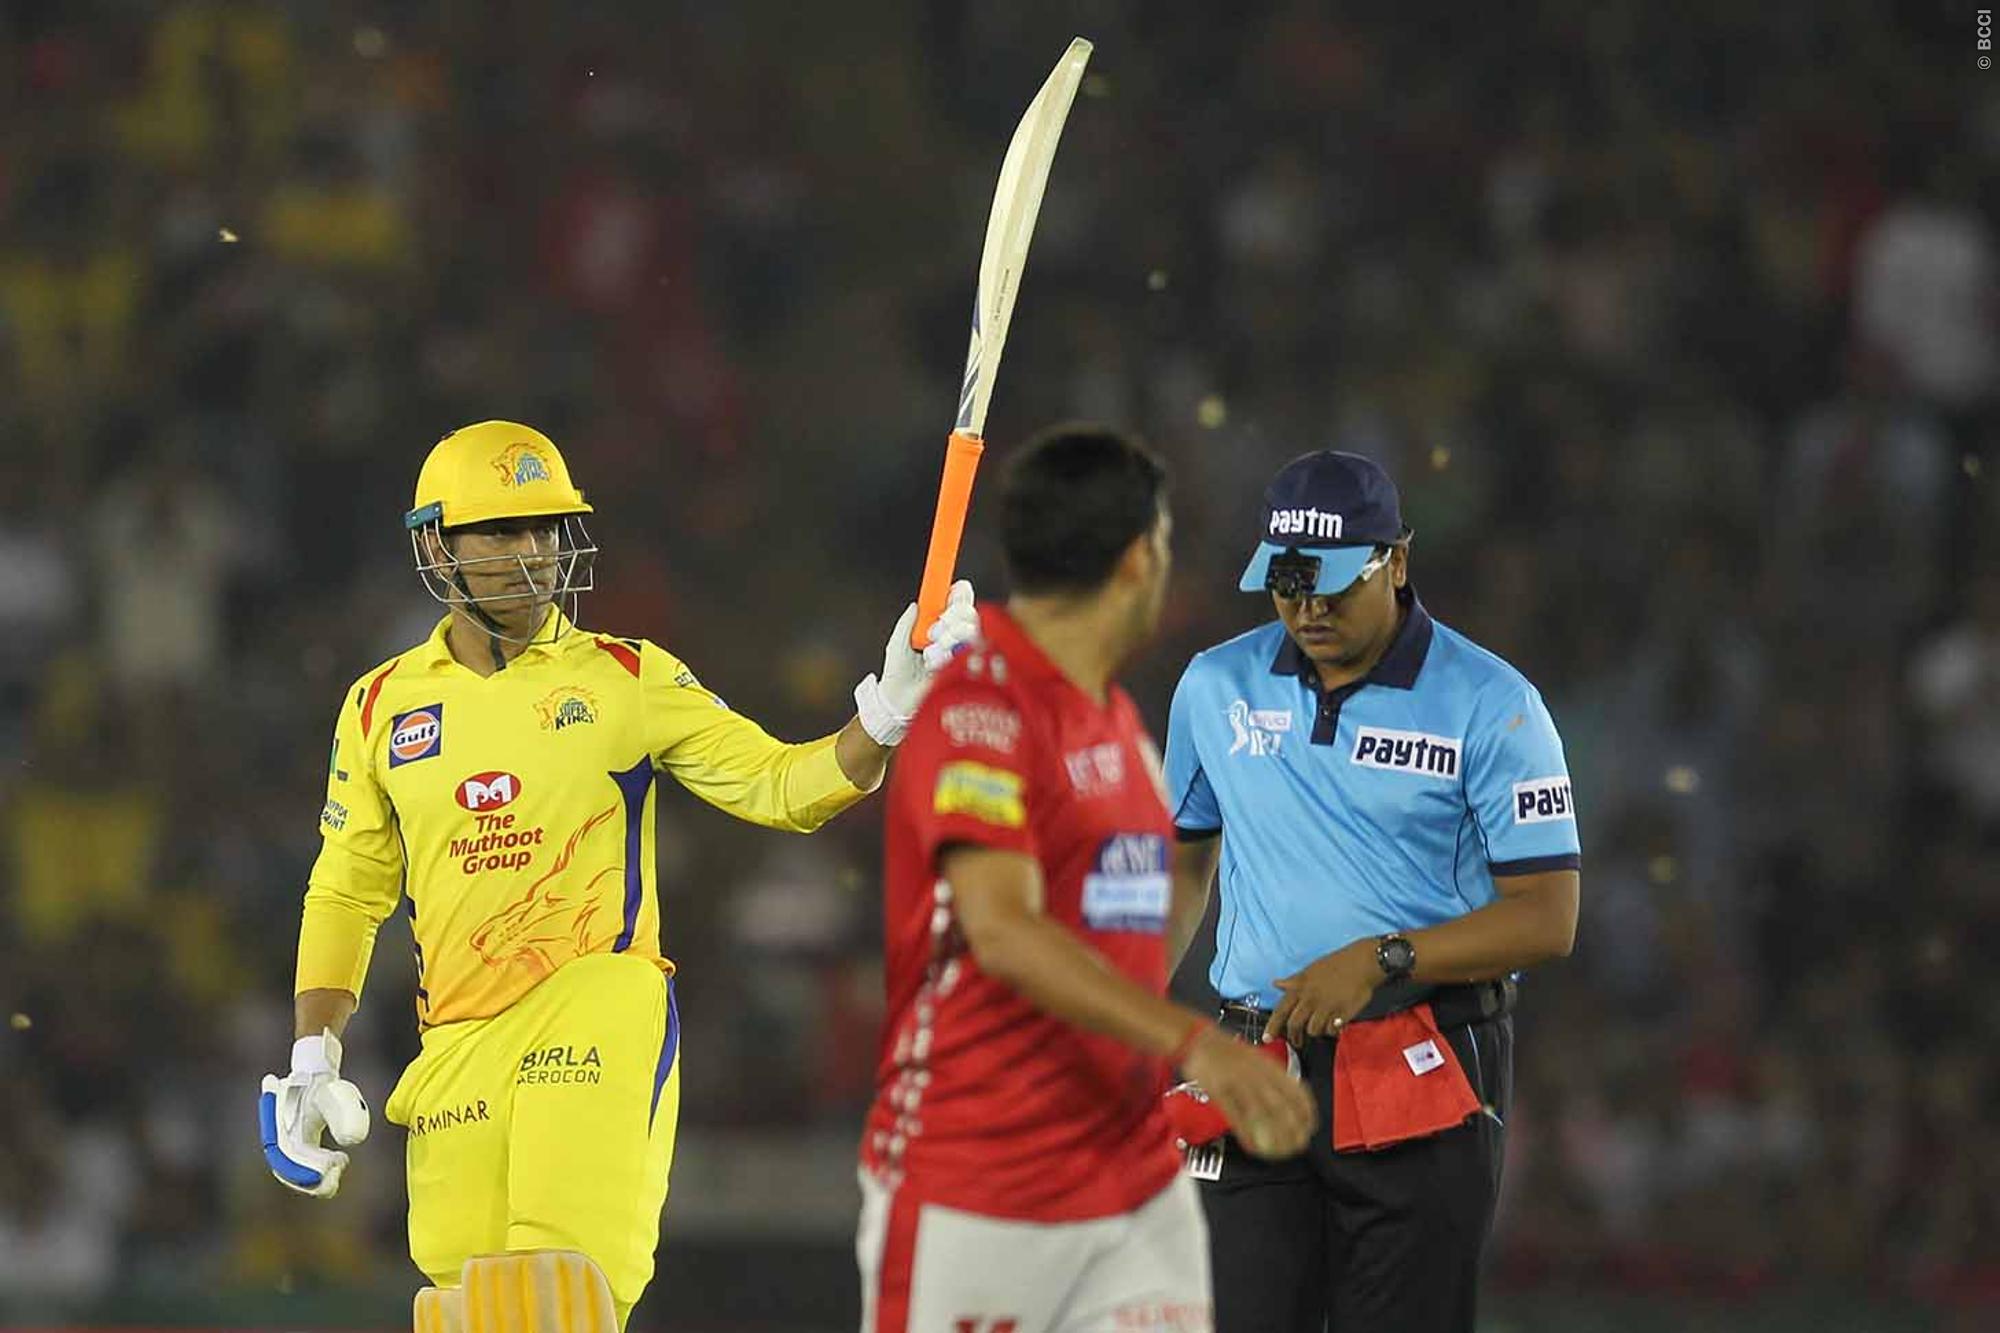 CSK got MS Dhoni only due to opting out of choosing an icon player, reveals N Srinivasan